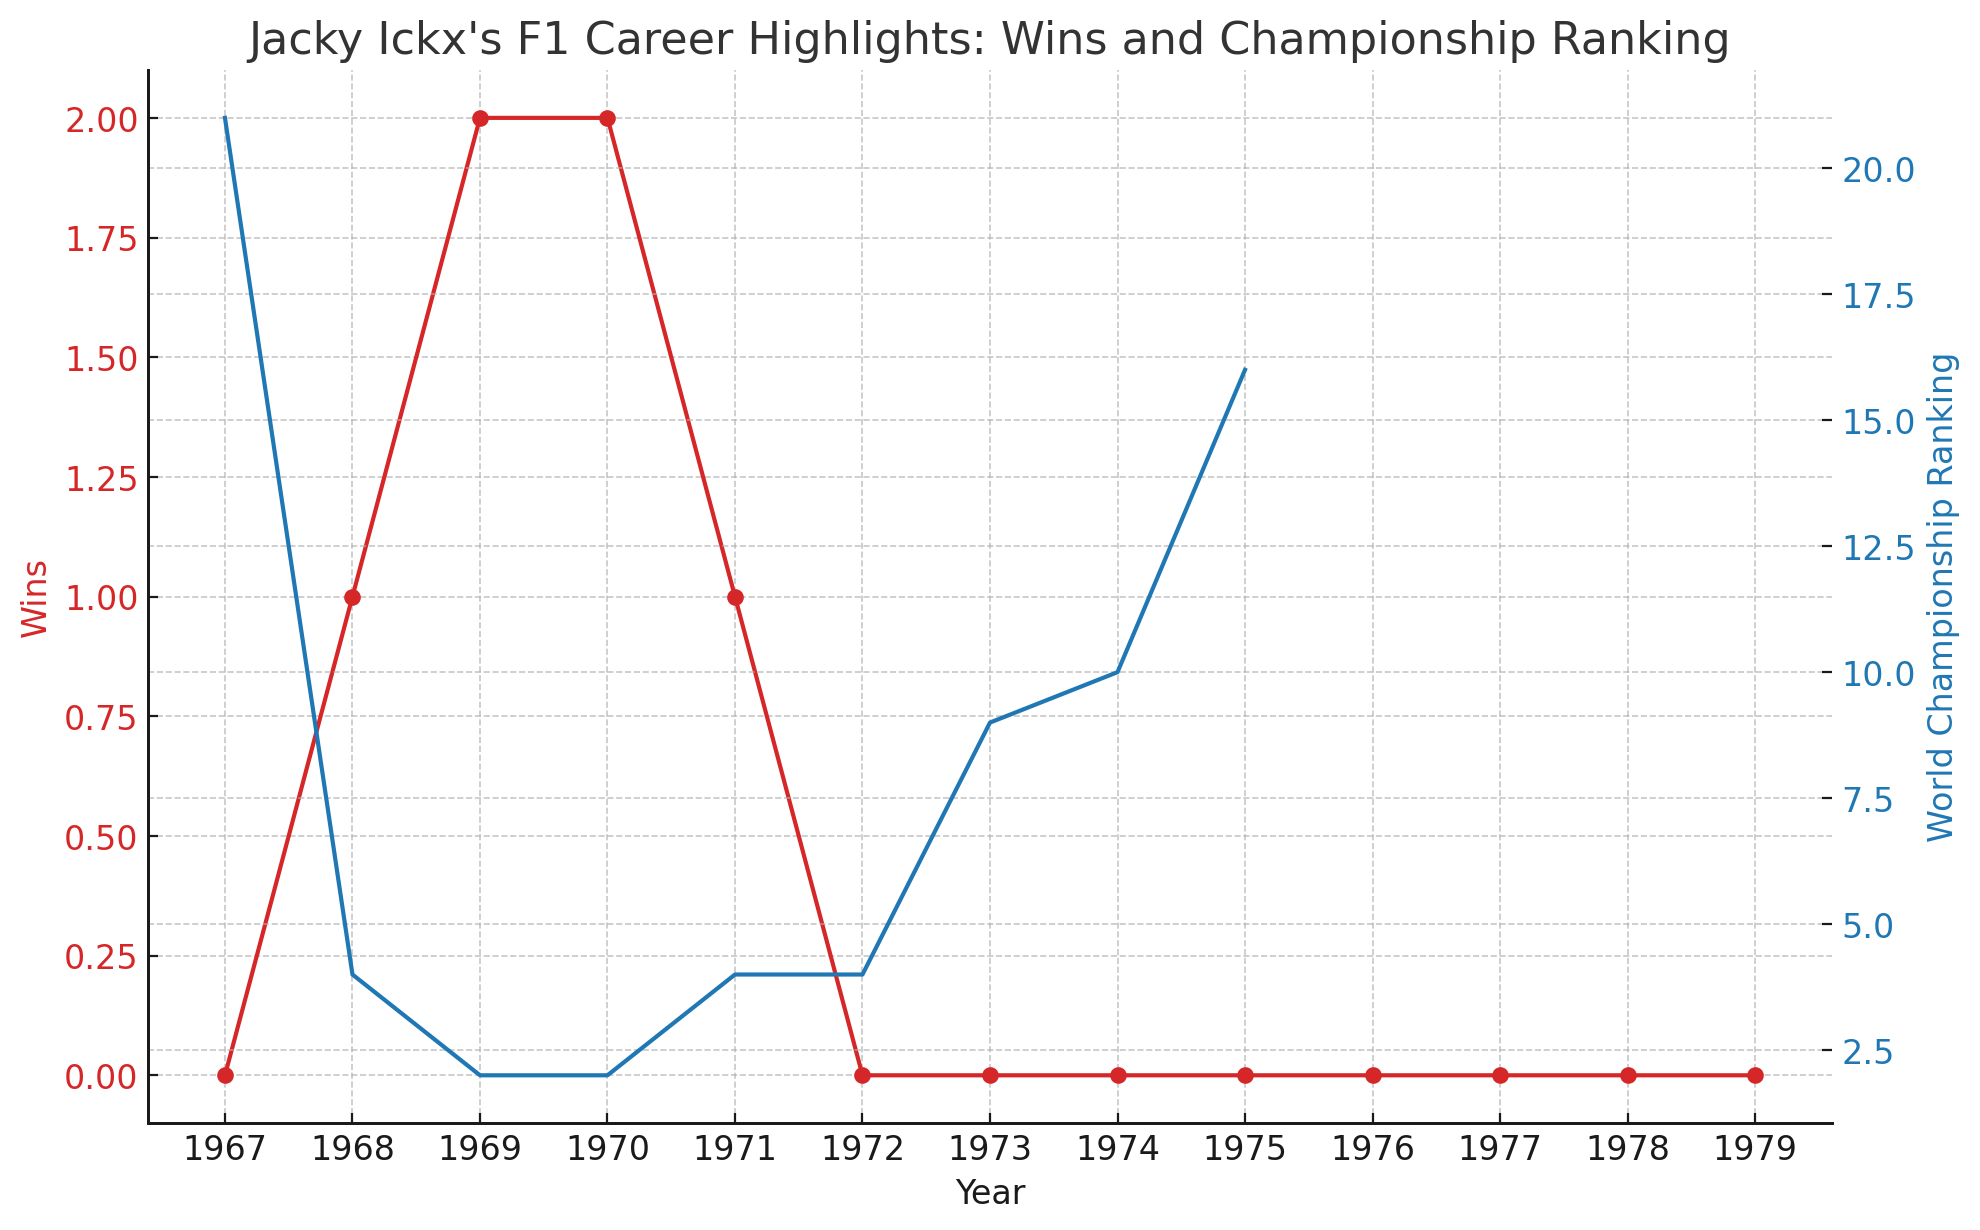 Jacques Bernard Ickx  - career wins and World Championship rankings over the years. The red line represents his wins, highlighting the peak years of his success in the late 1960s and early 1970s, while the blue line shows his World Championship rankings, with notable second-place finishes in 1969 and 1970.